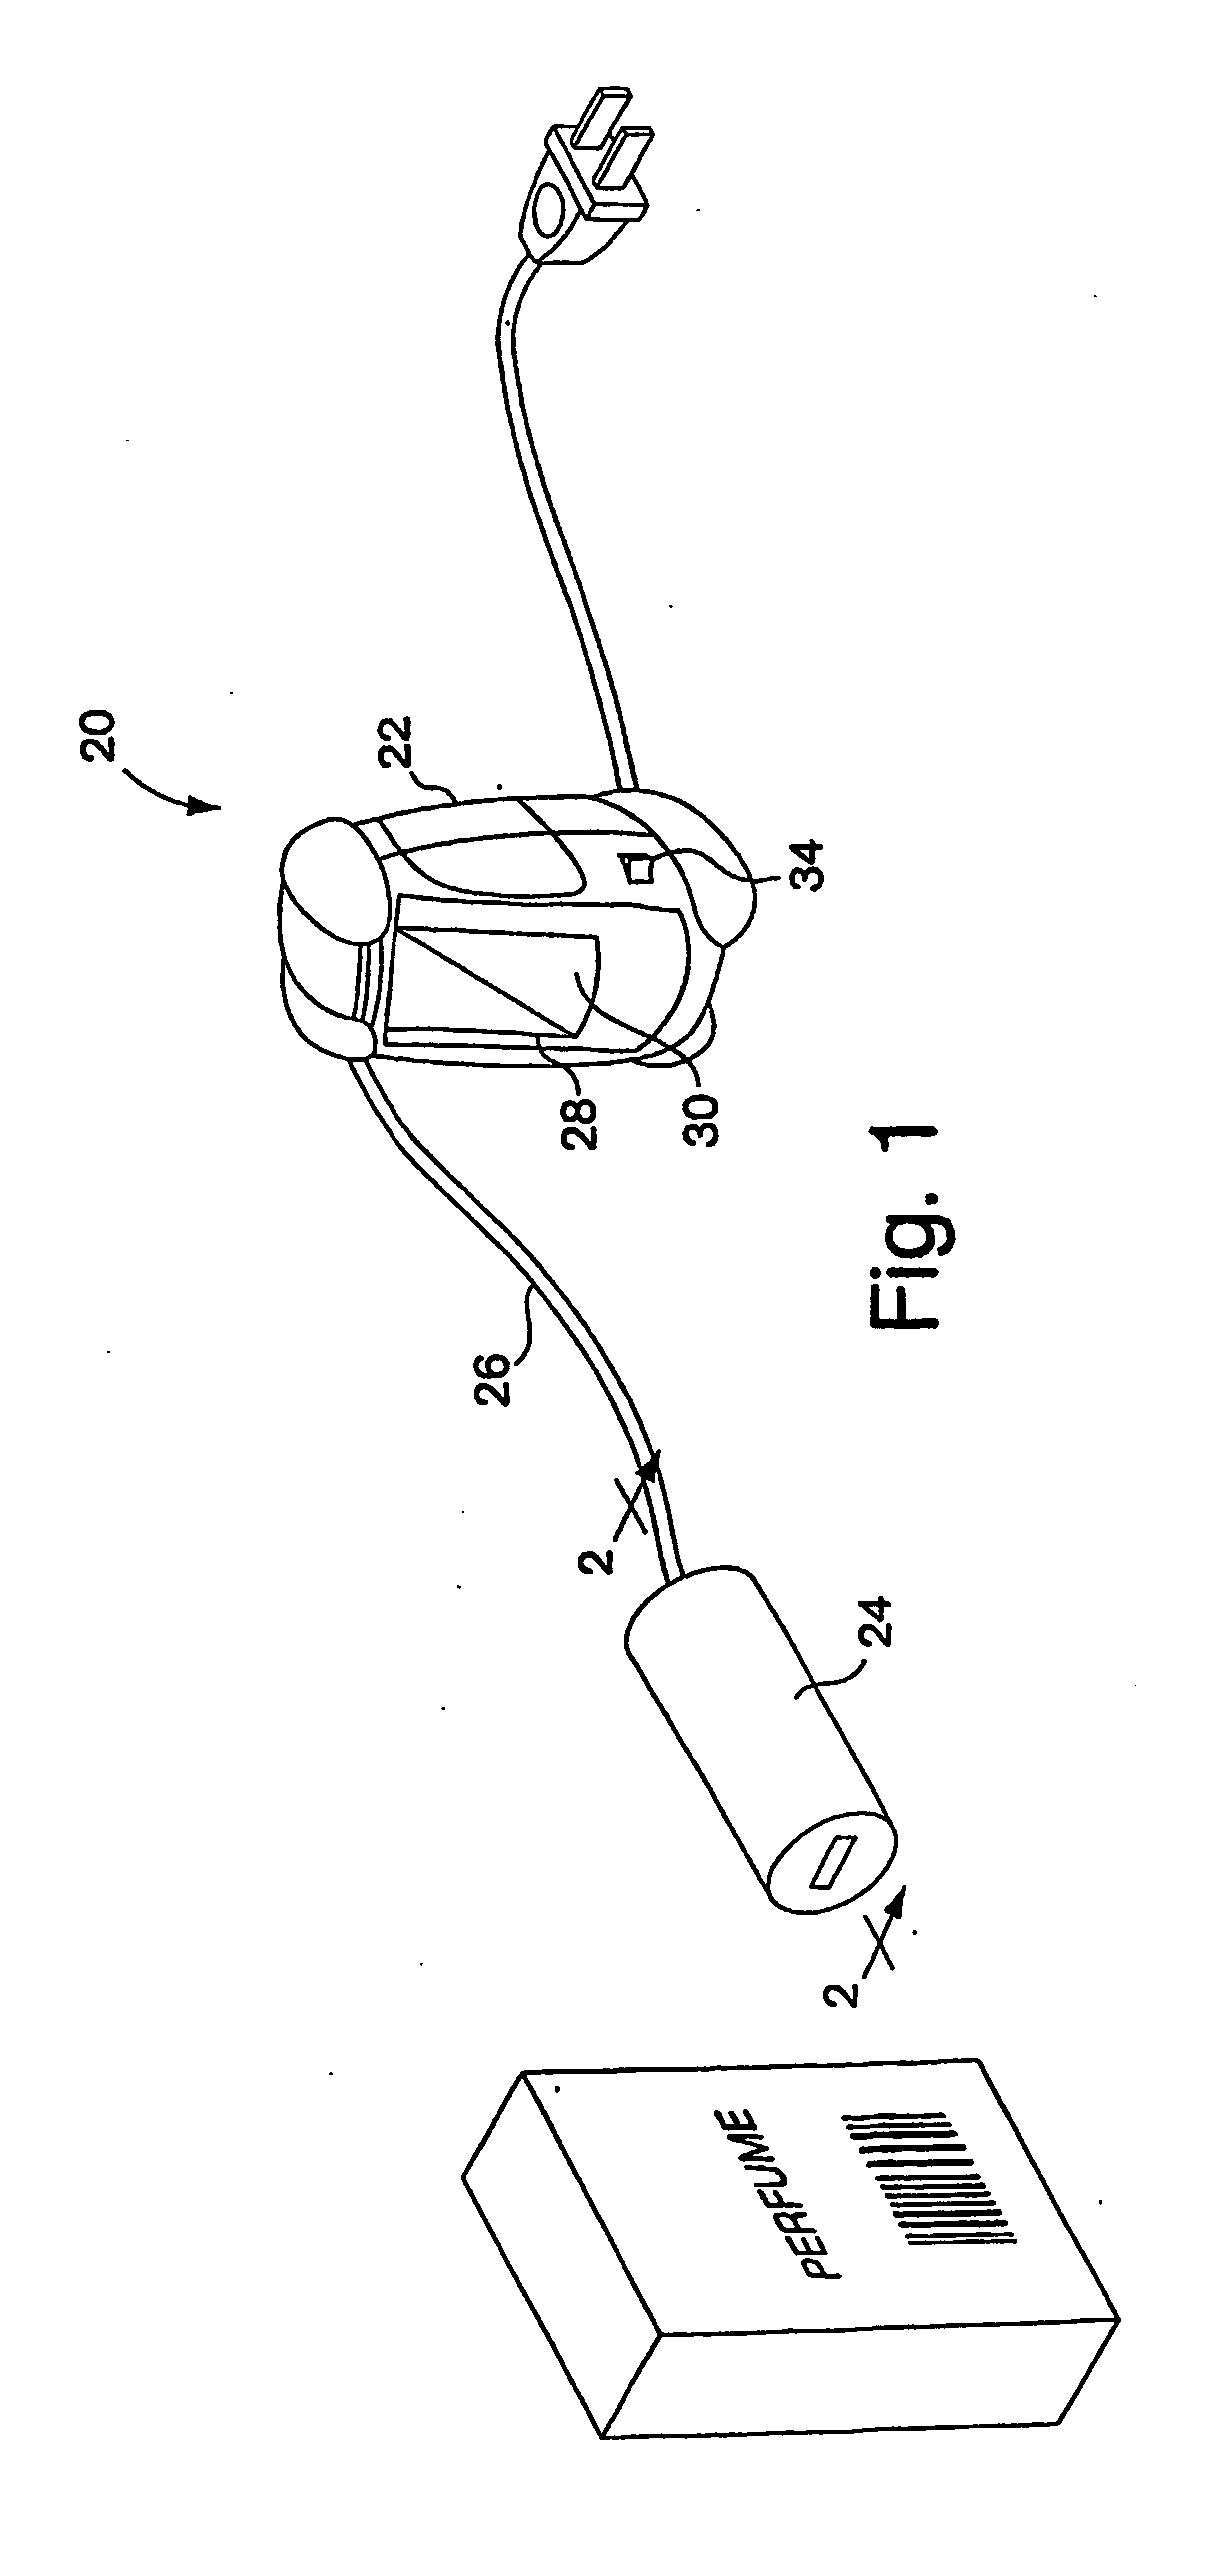 Tamper-resistant authentication mark for use in product or product packaging authentication